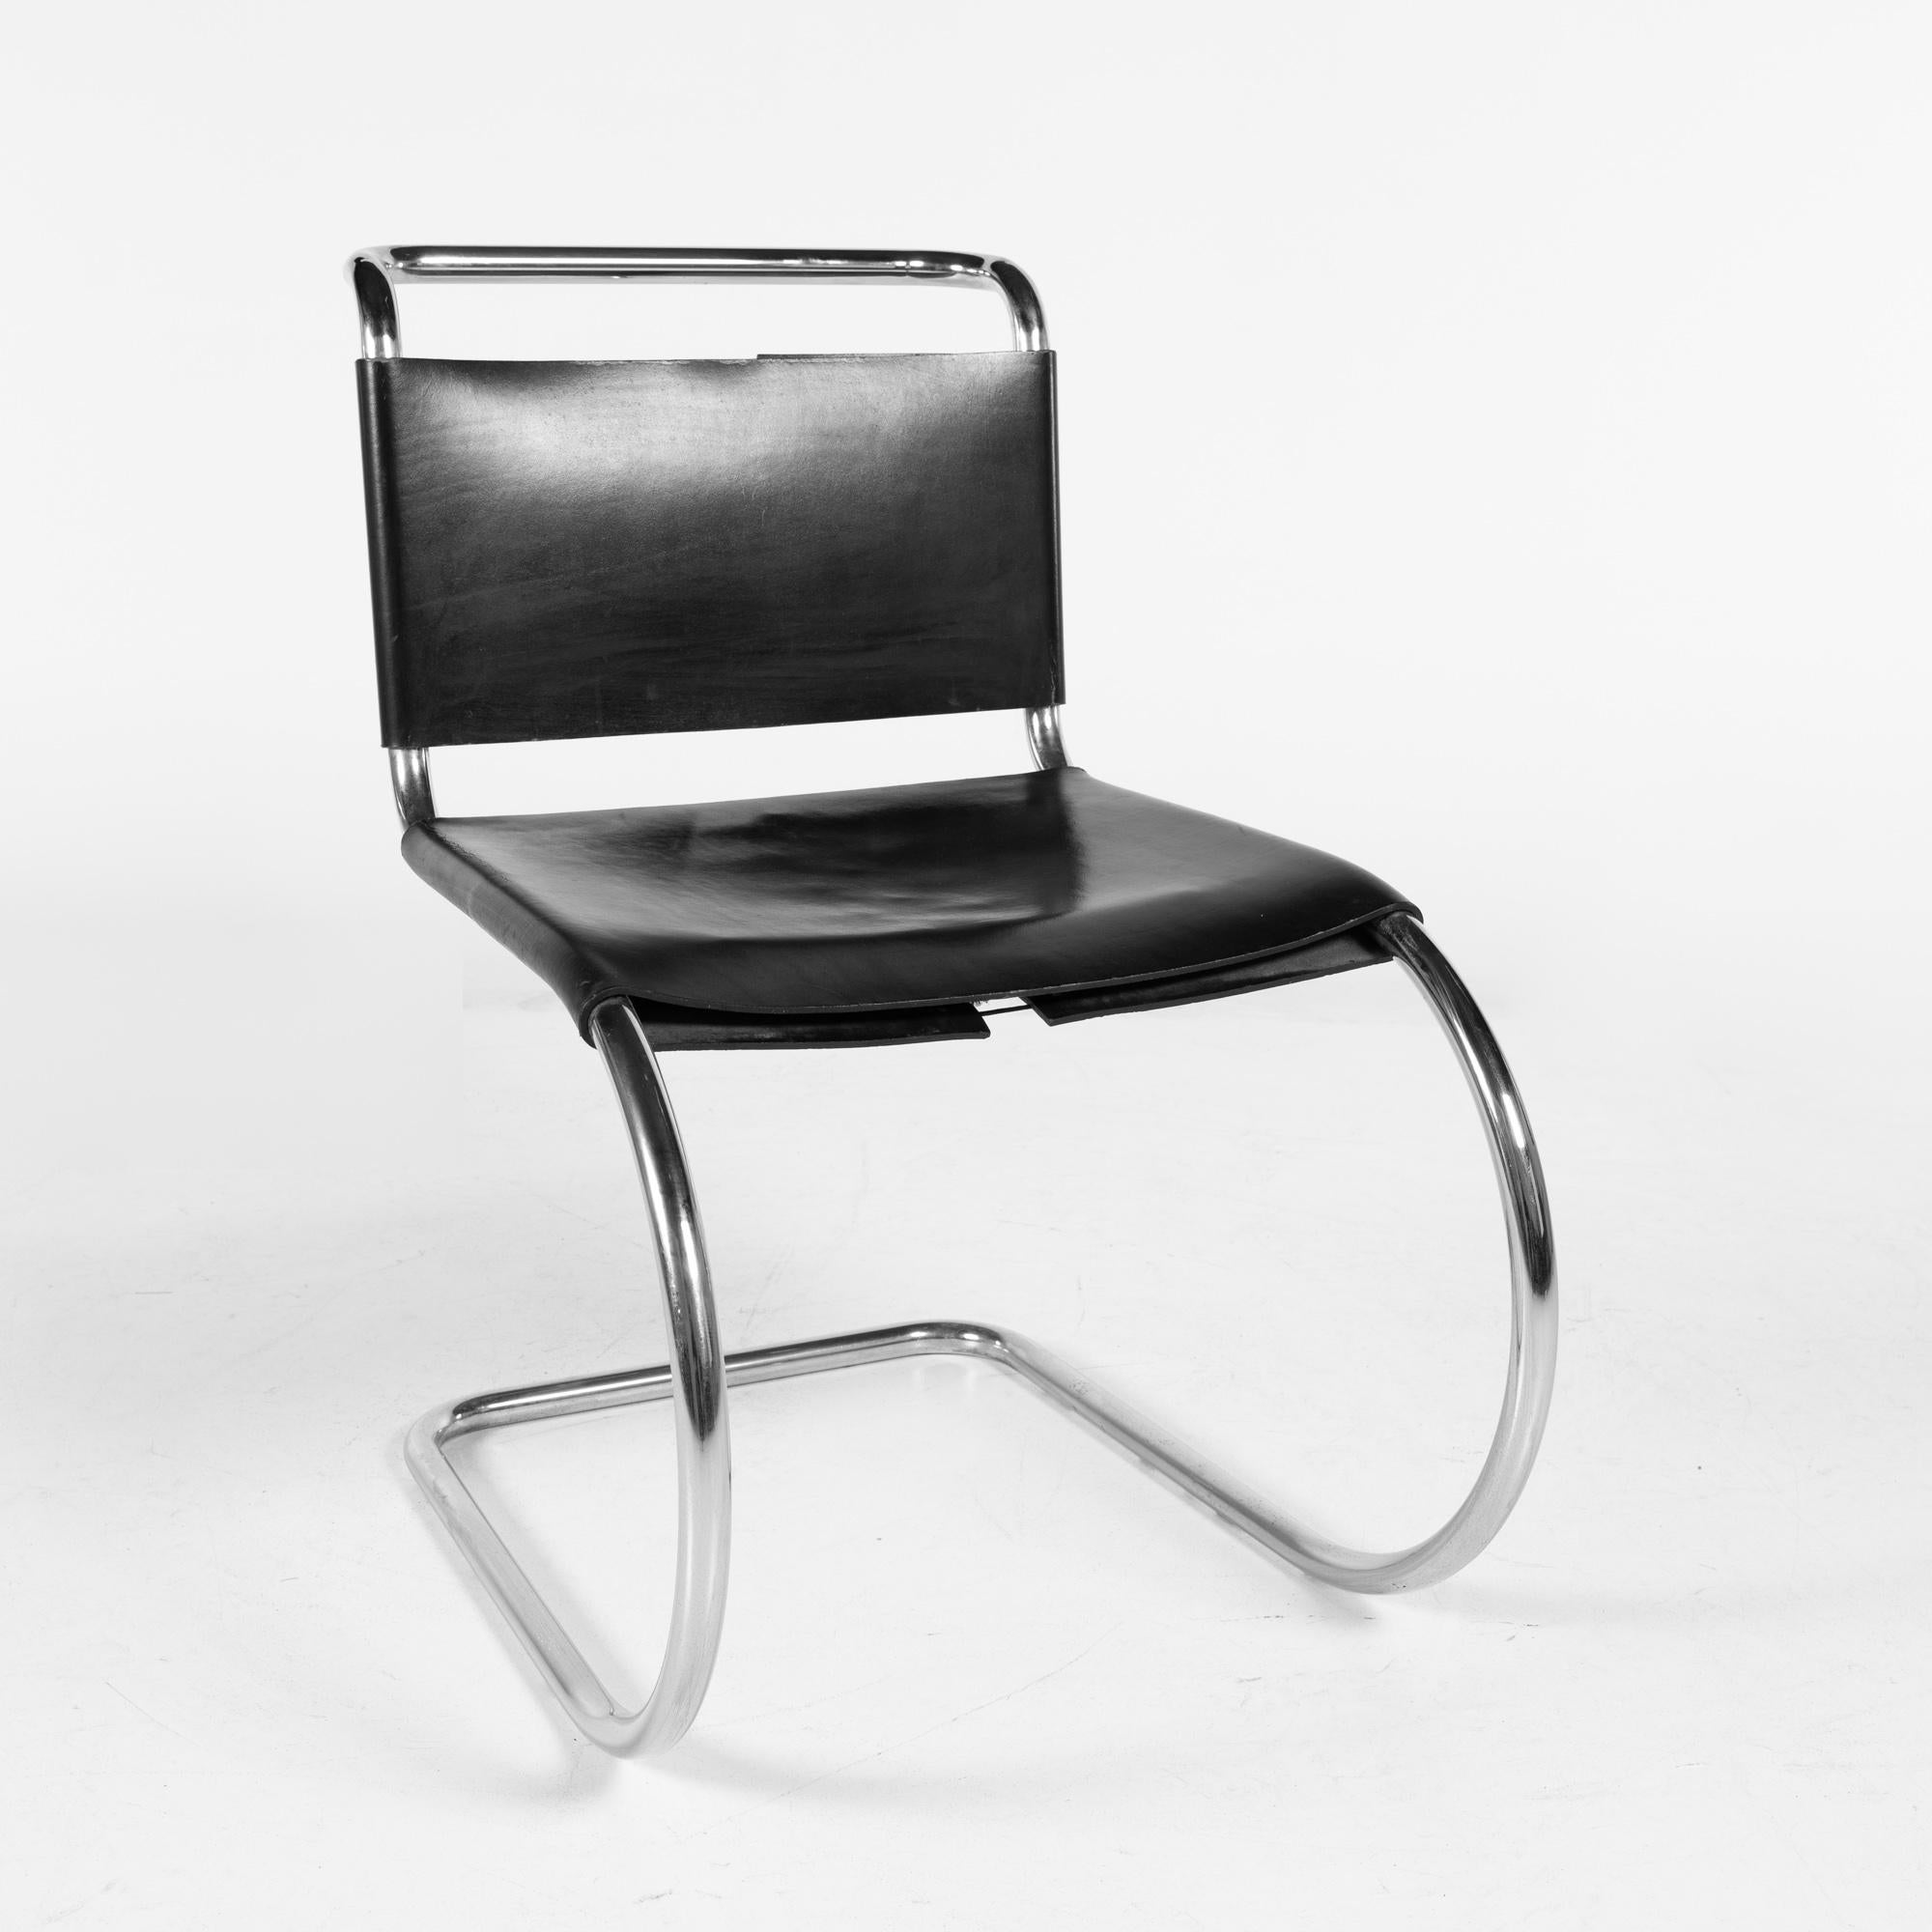 Italian Mart Stam for Fasem Model S33 Mid Century Leather and Chrome Cantilever Chairs